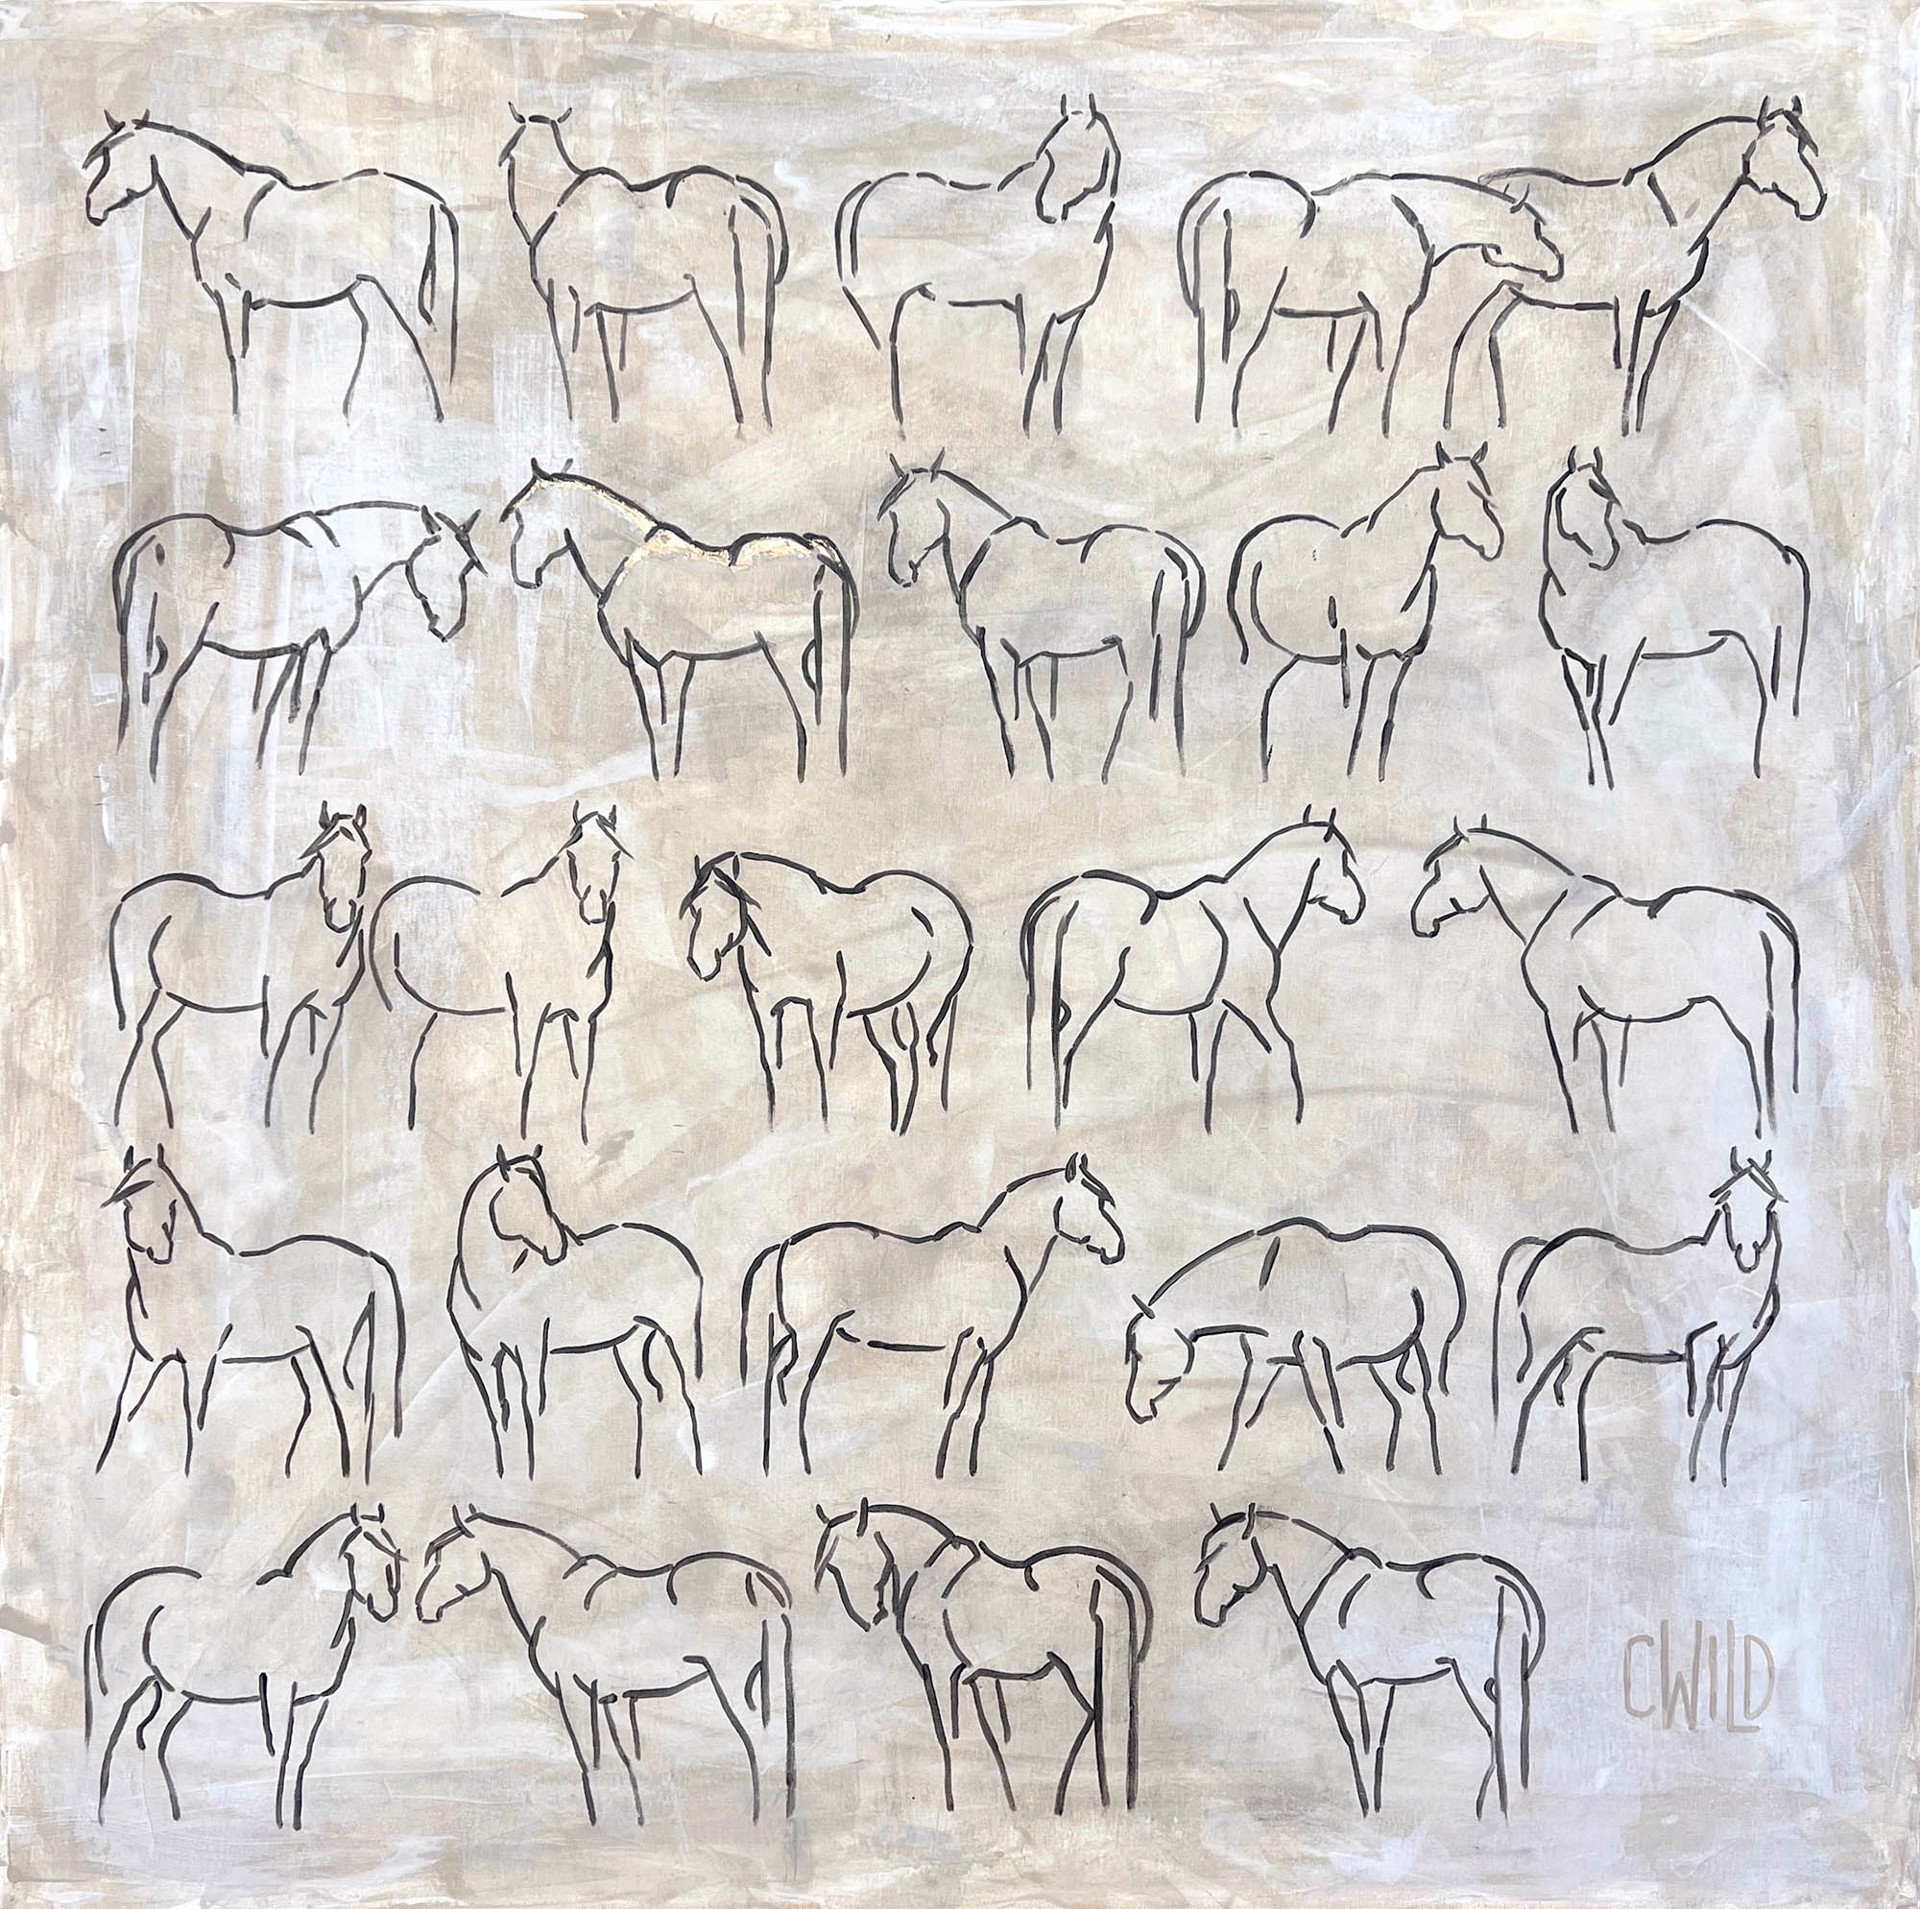 Original Acrylic Painting By Carrie Wild Featuring Twenty Four Horses Sketched In Black Outlines Over Abstract Neutral Background